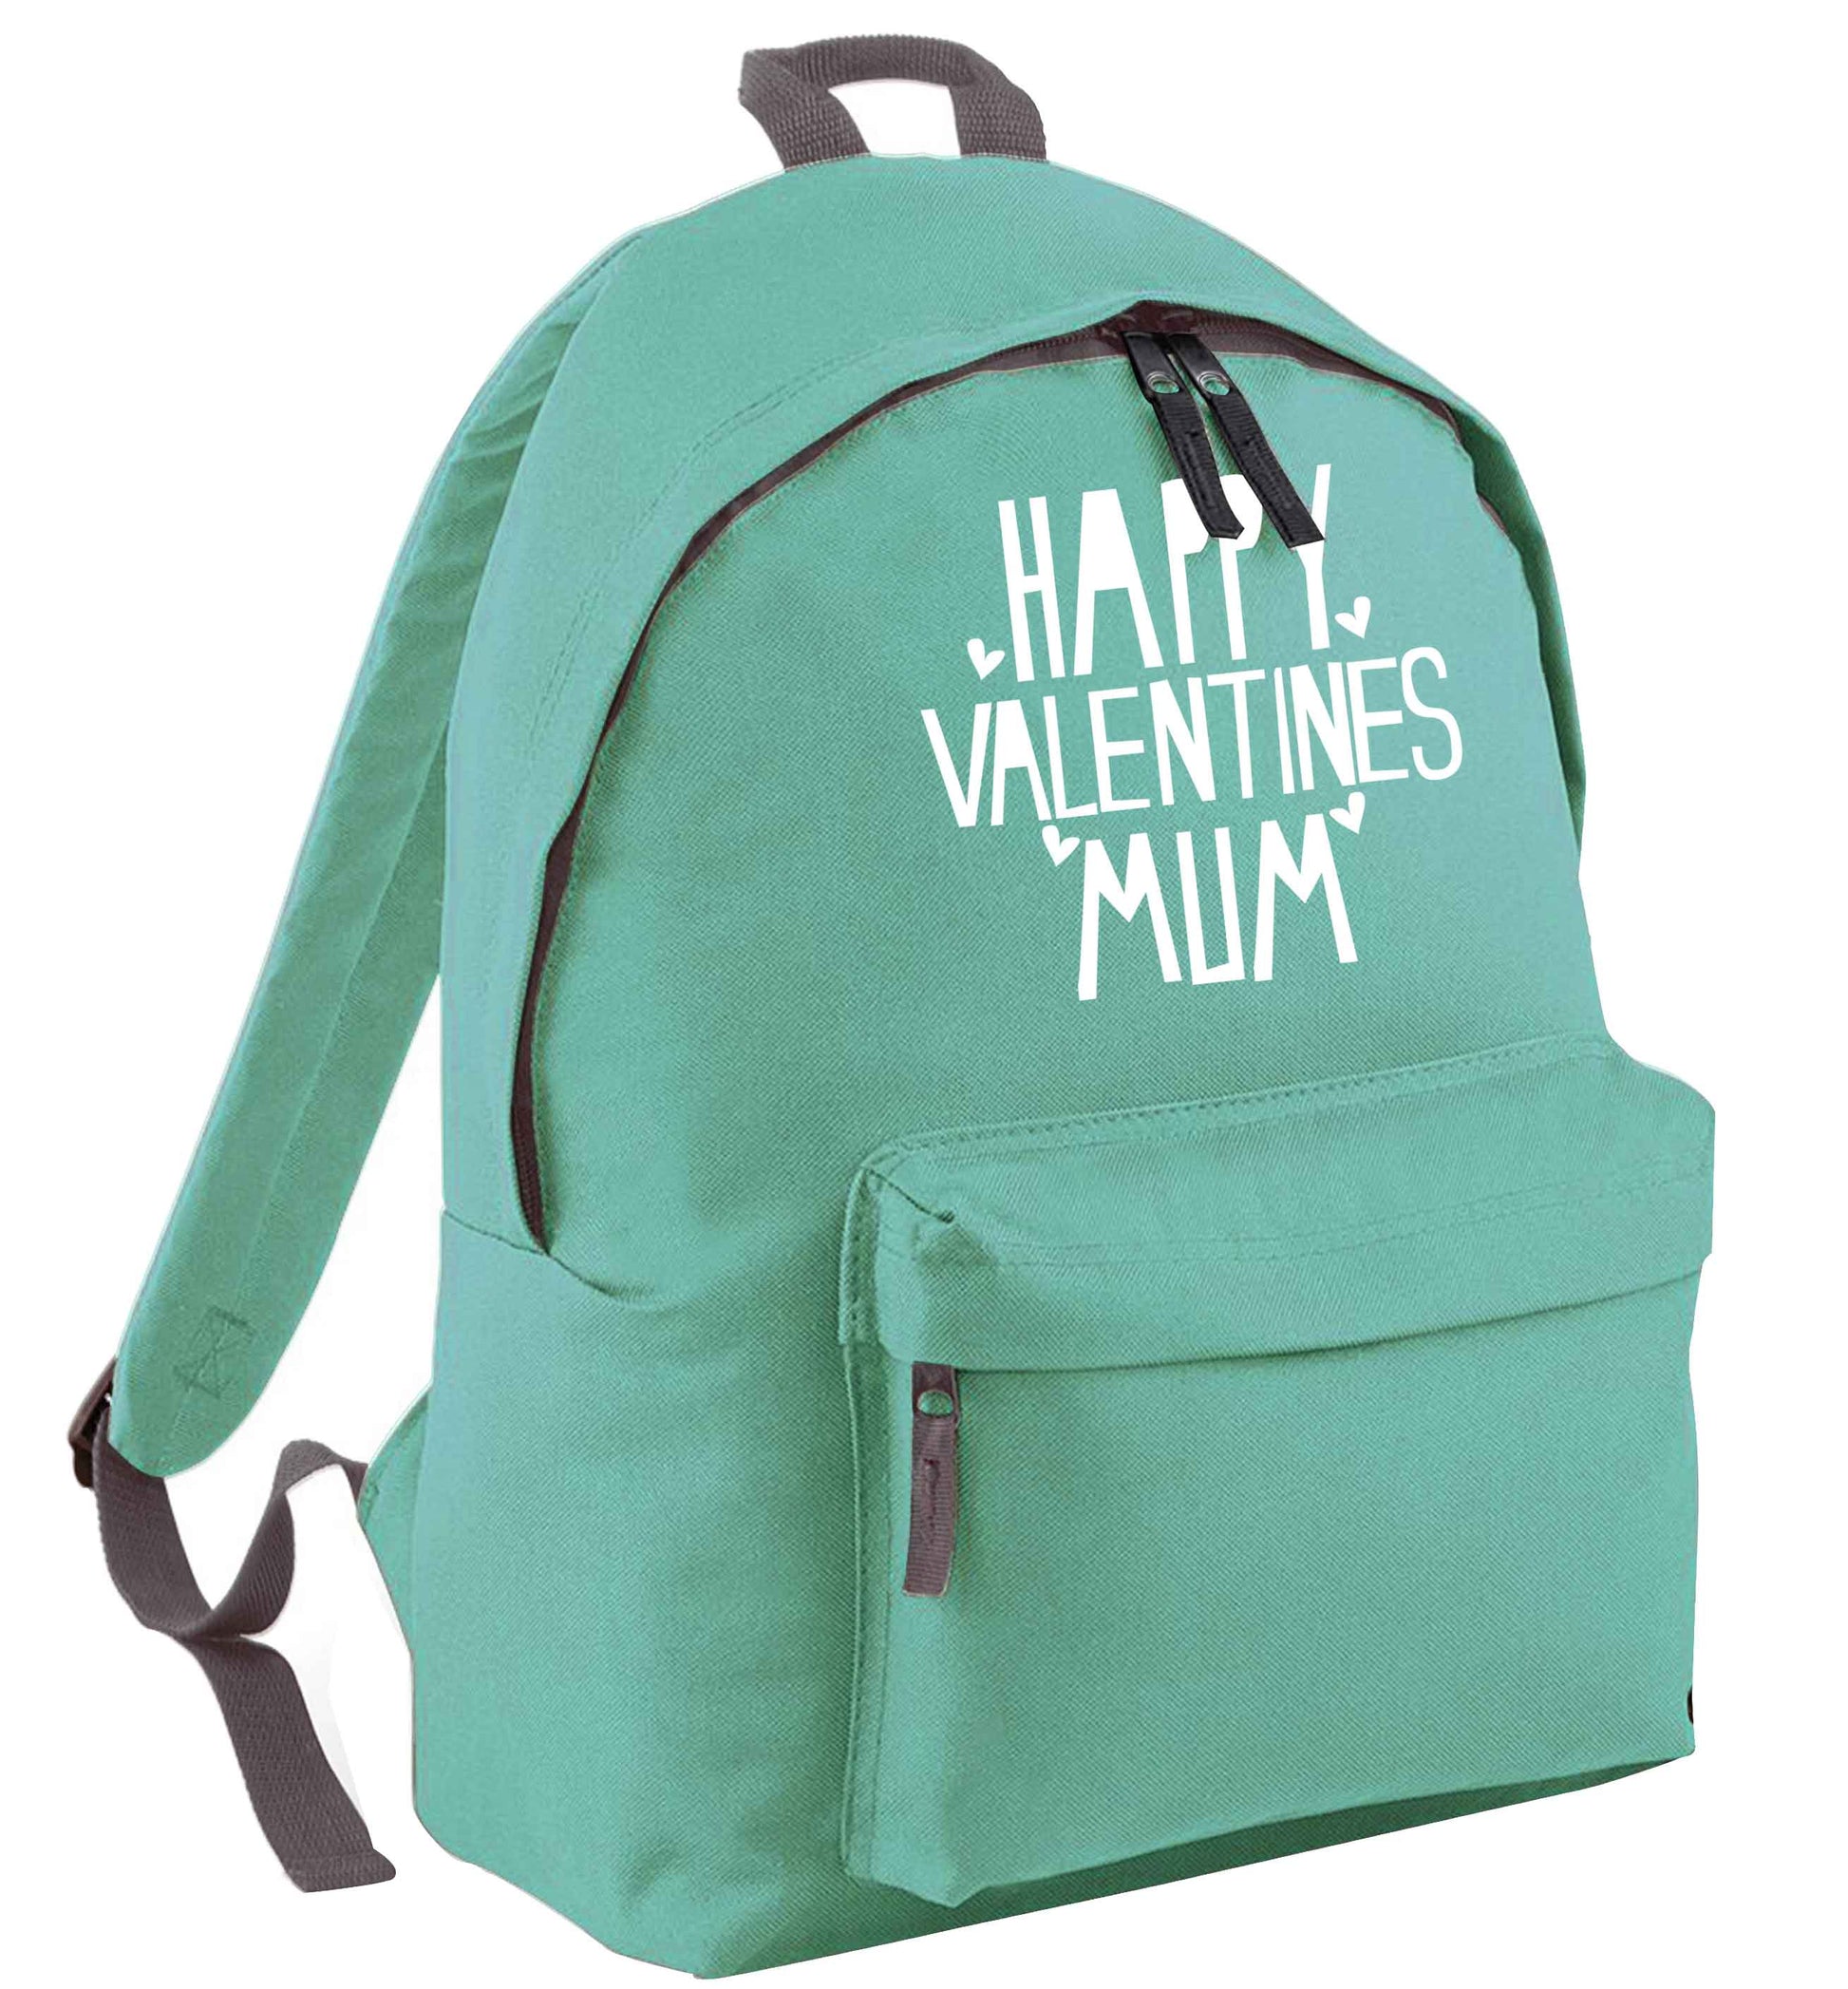 Happy valentines mum mint adults backpack